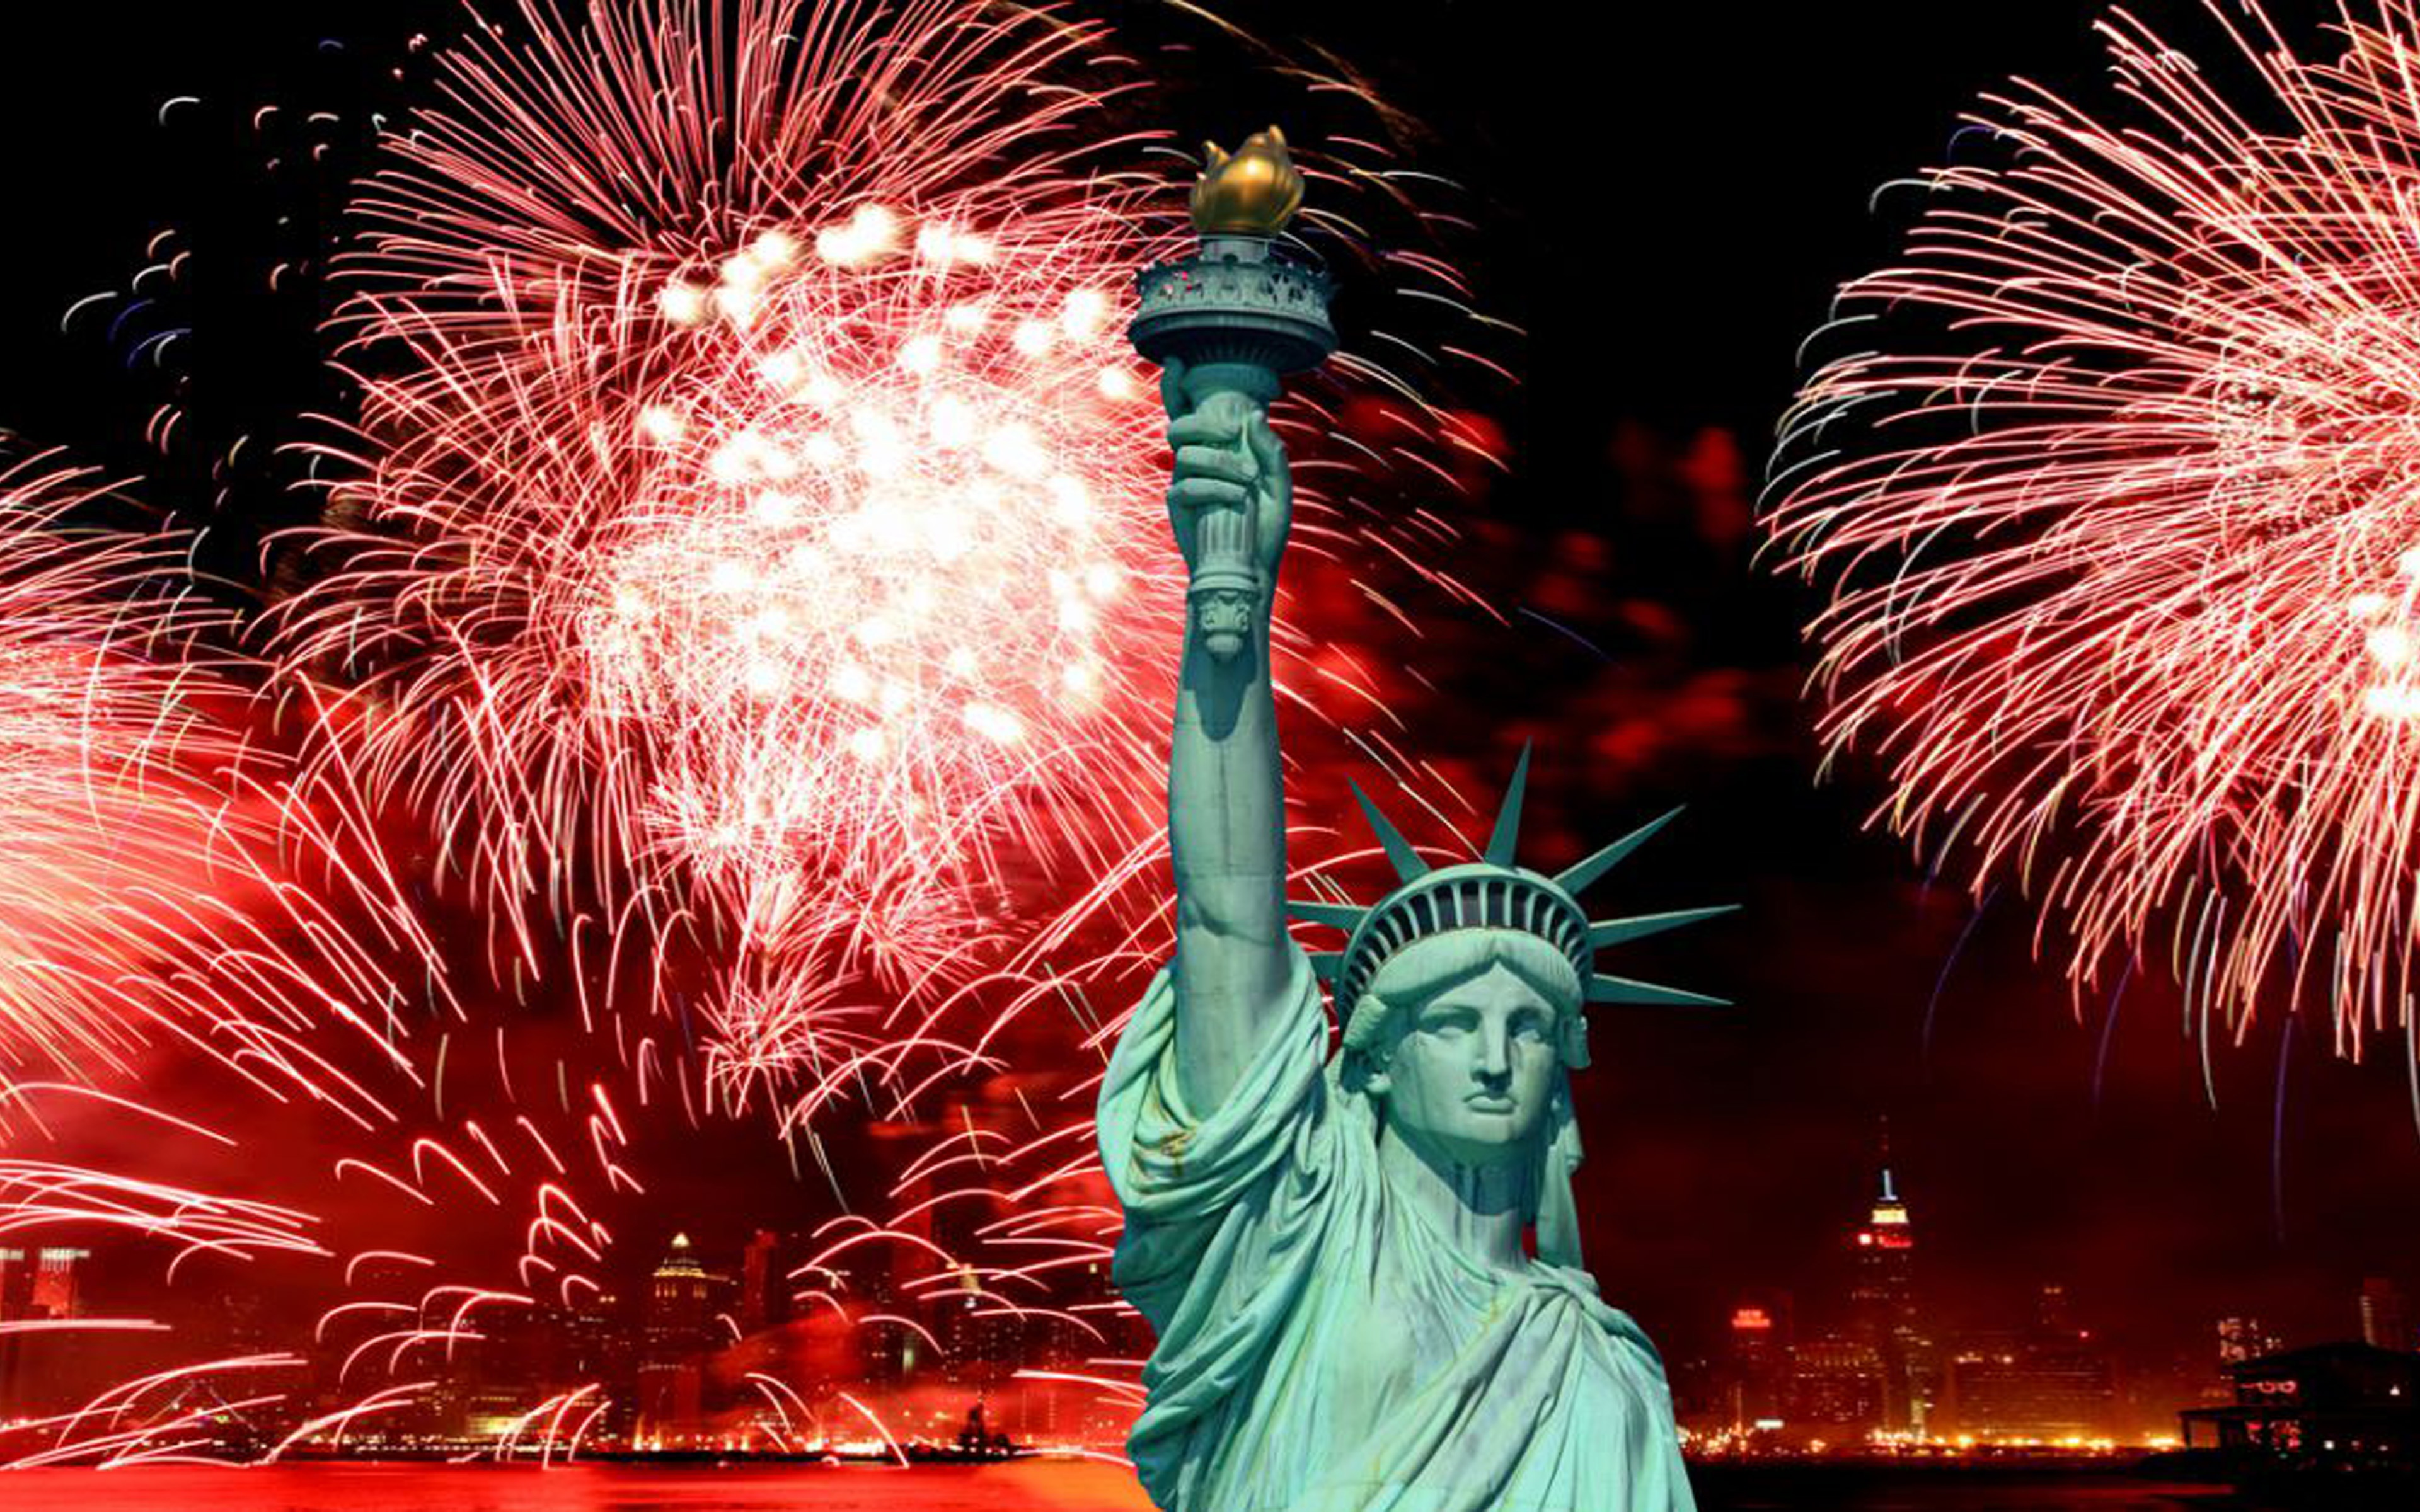 The Statue Of Liberty And 4th Of July Celebration Fireworks Desktop Hd